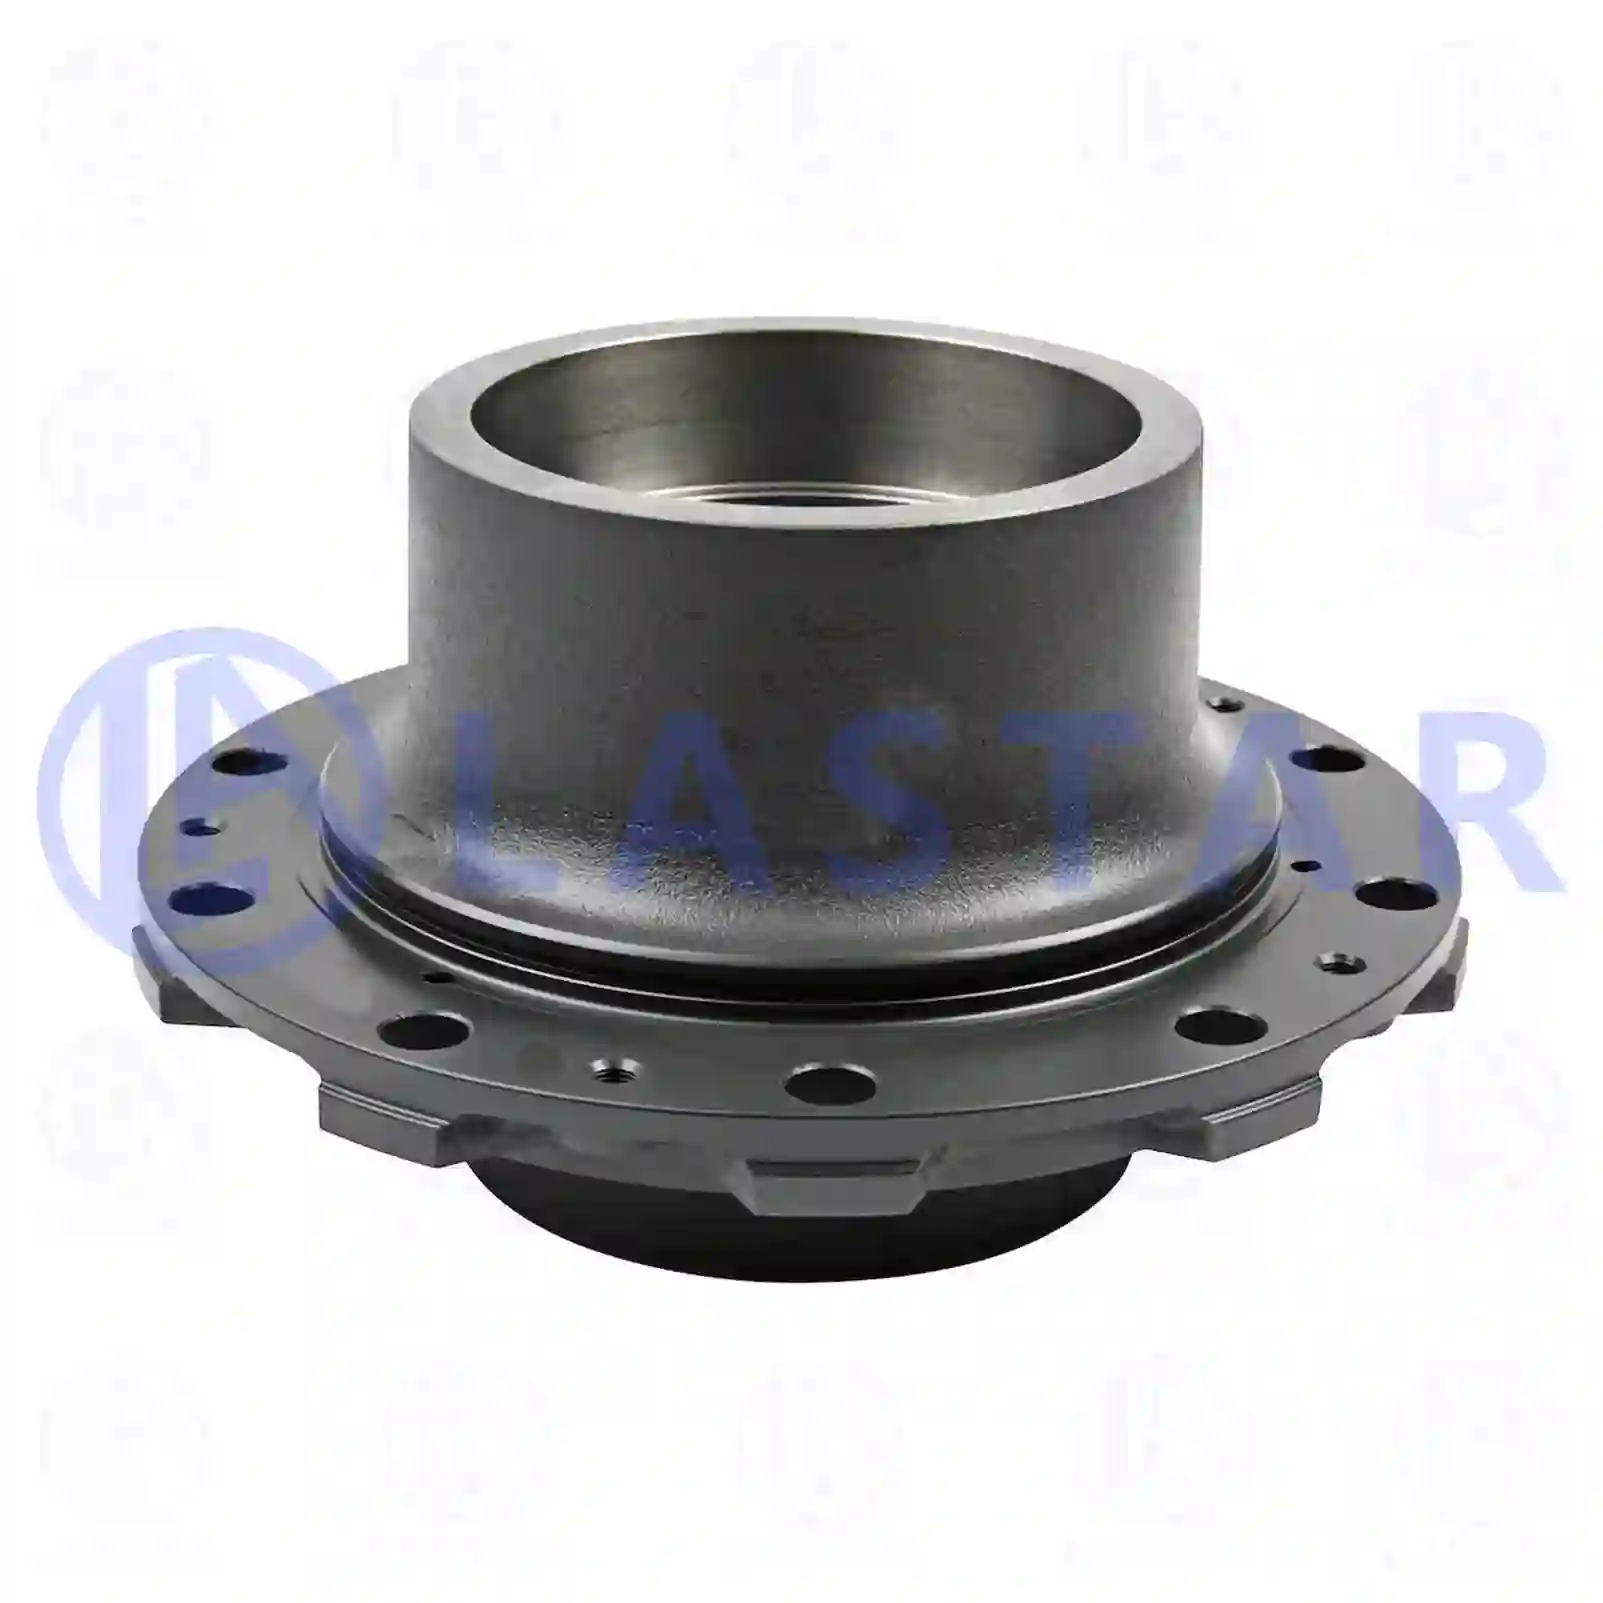 Wheel hub, with bearing, 77726333, 3463562801S, 3463562901S, 9423561701S, , , , ||  77726333 Lastar Spare Part | Truck Spare Parts, Auotomotive Spare Parts Wheel hub, with bearing, 77726333, 3463562801S, 3463562901S, 9423561701S, , , , ||  77726333 Lastar Spare Part | Truck Spare Parts, Auotomotive Spare Parts